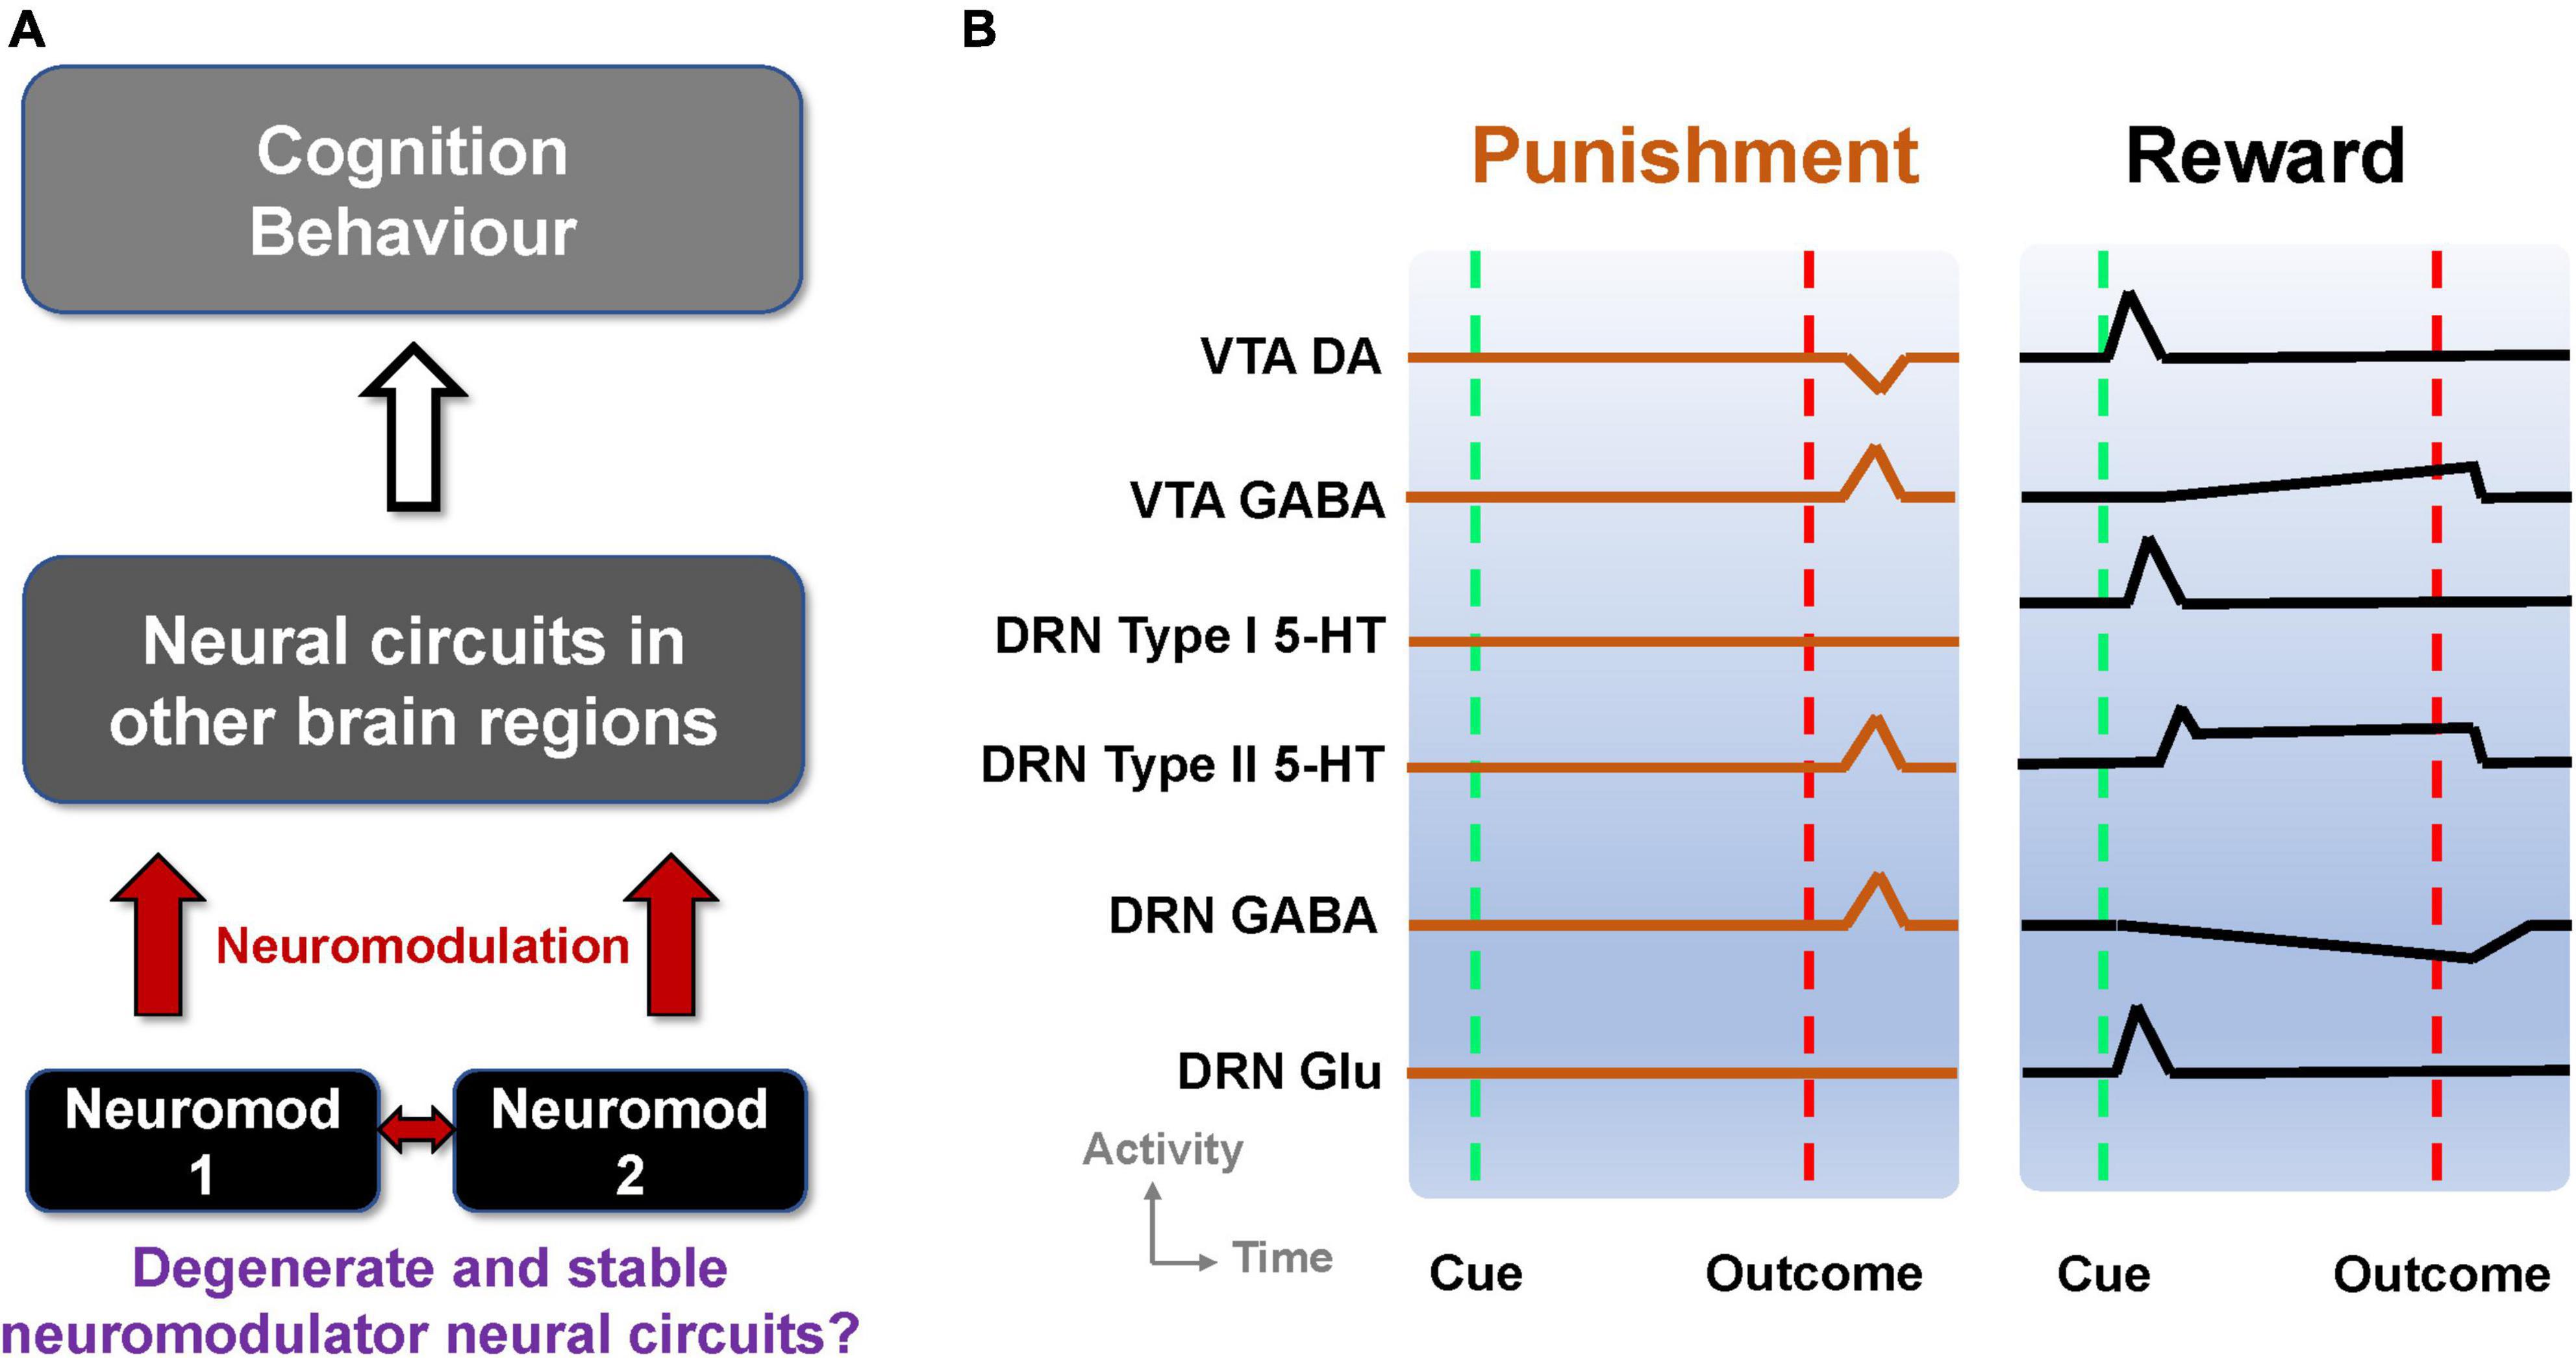 Degeneracy and stability in neural circuits of dopamine and serotonin neuromodulators: A theoretical consideration